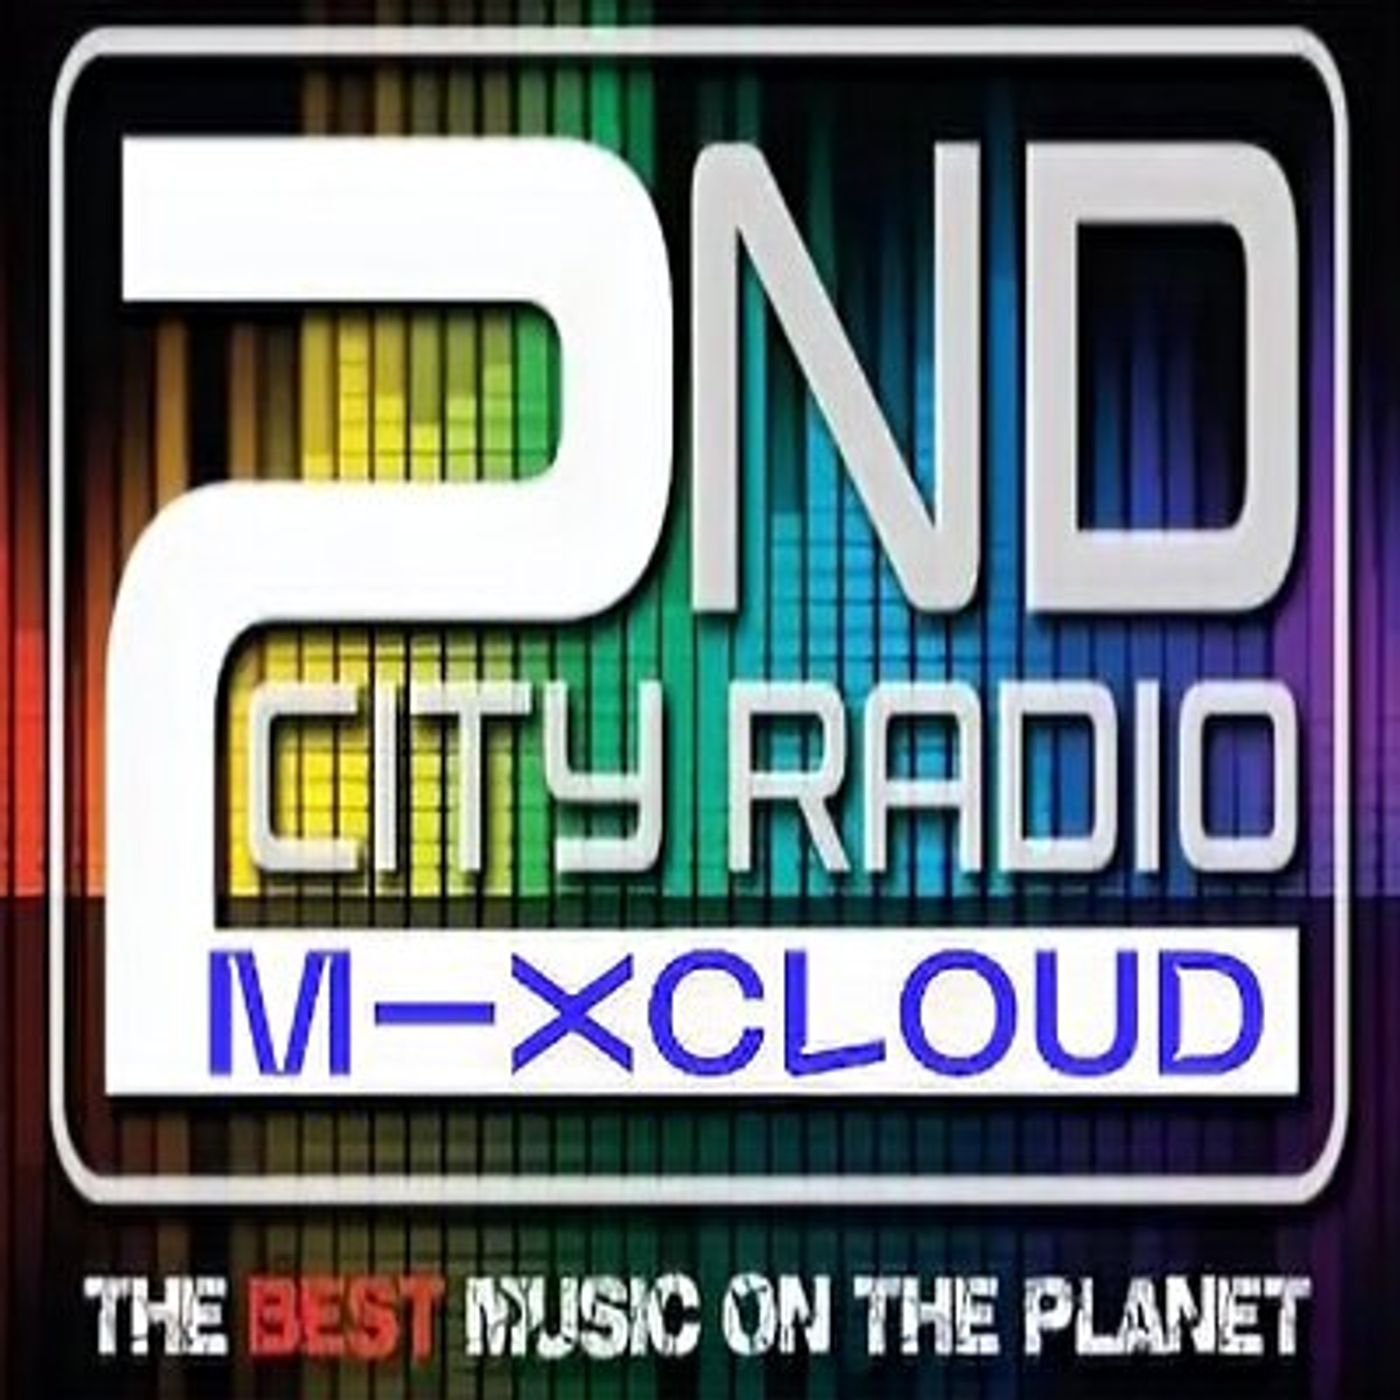 Saturday the 1st of Jan 2022 on 2ndcity Radio with Classic Chat